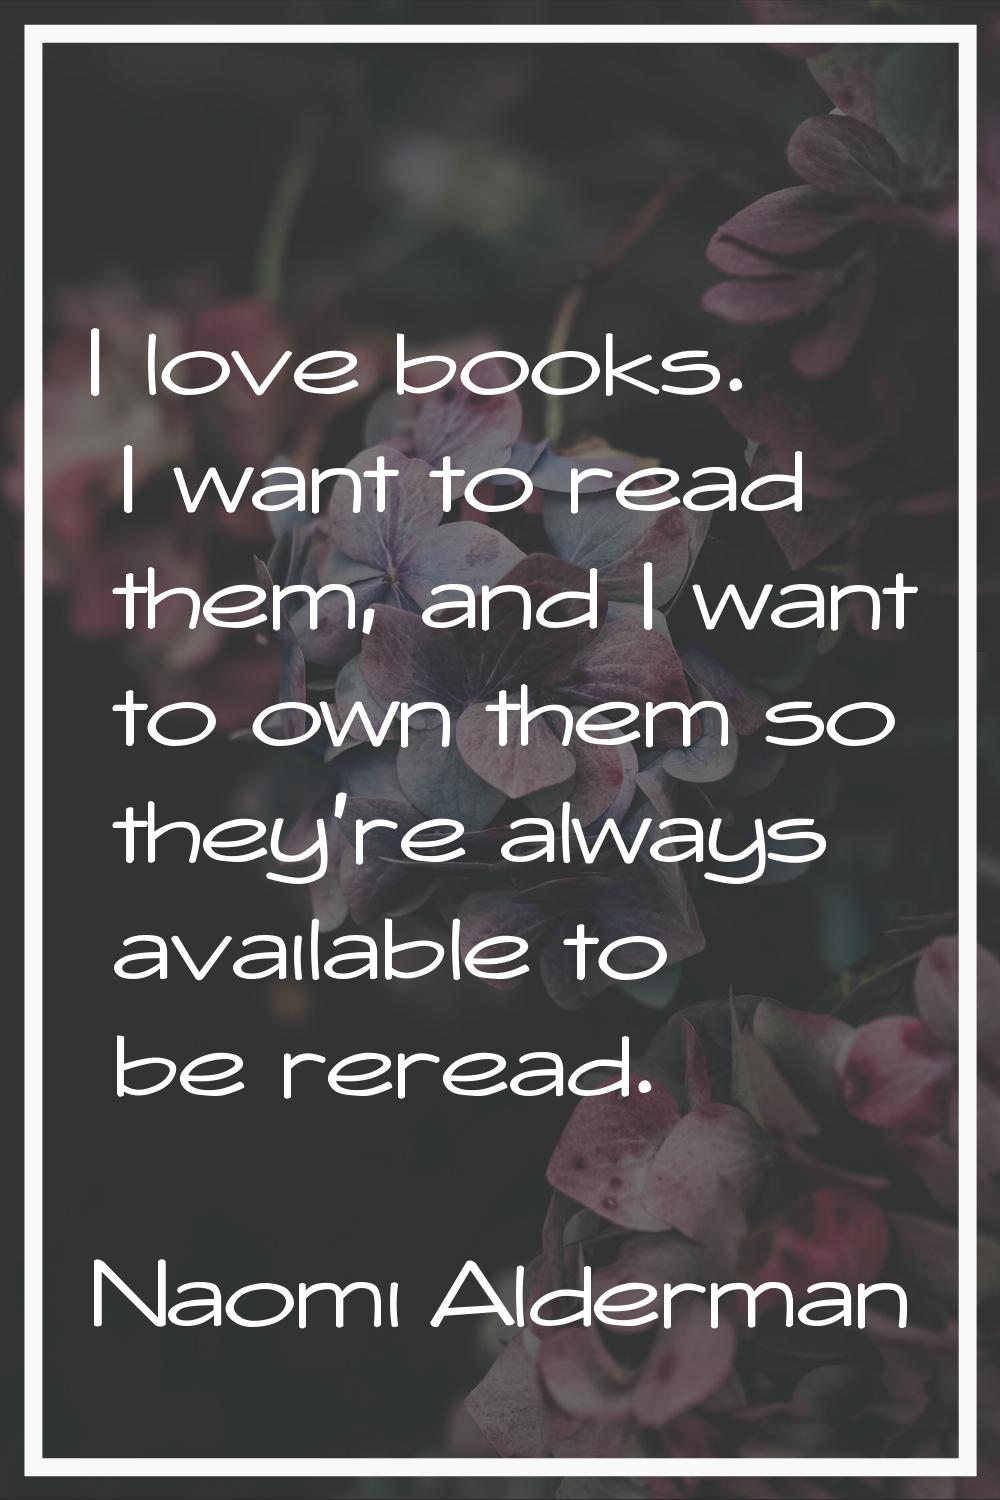 I love books. I want to read them, and I want to own them so they're always available to be reread.